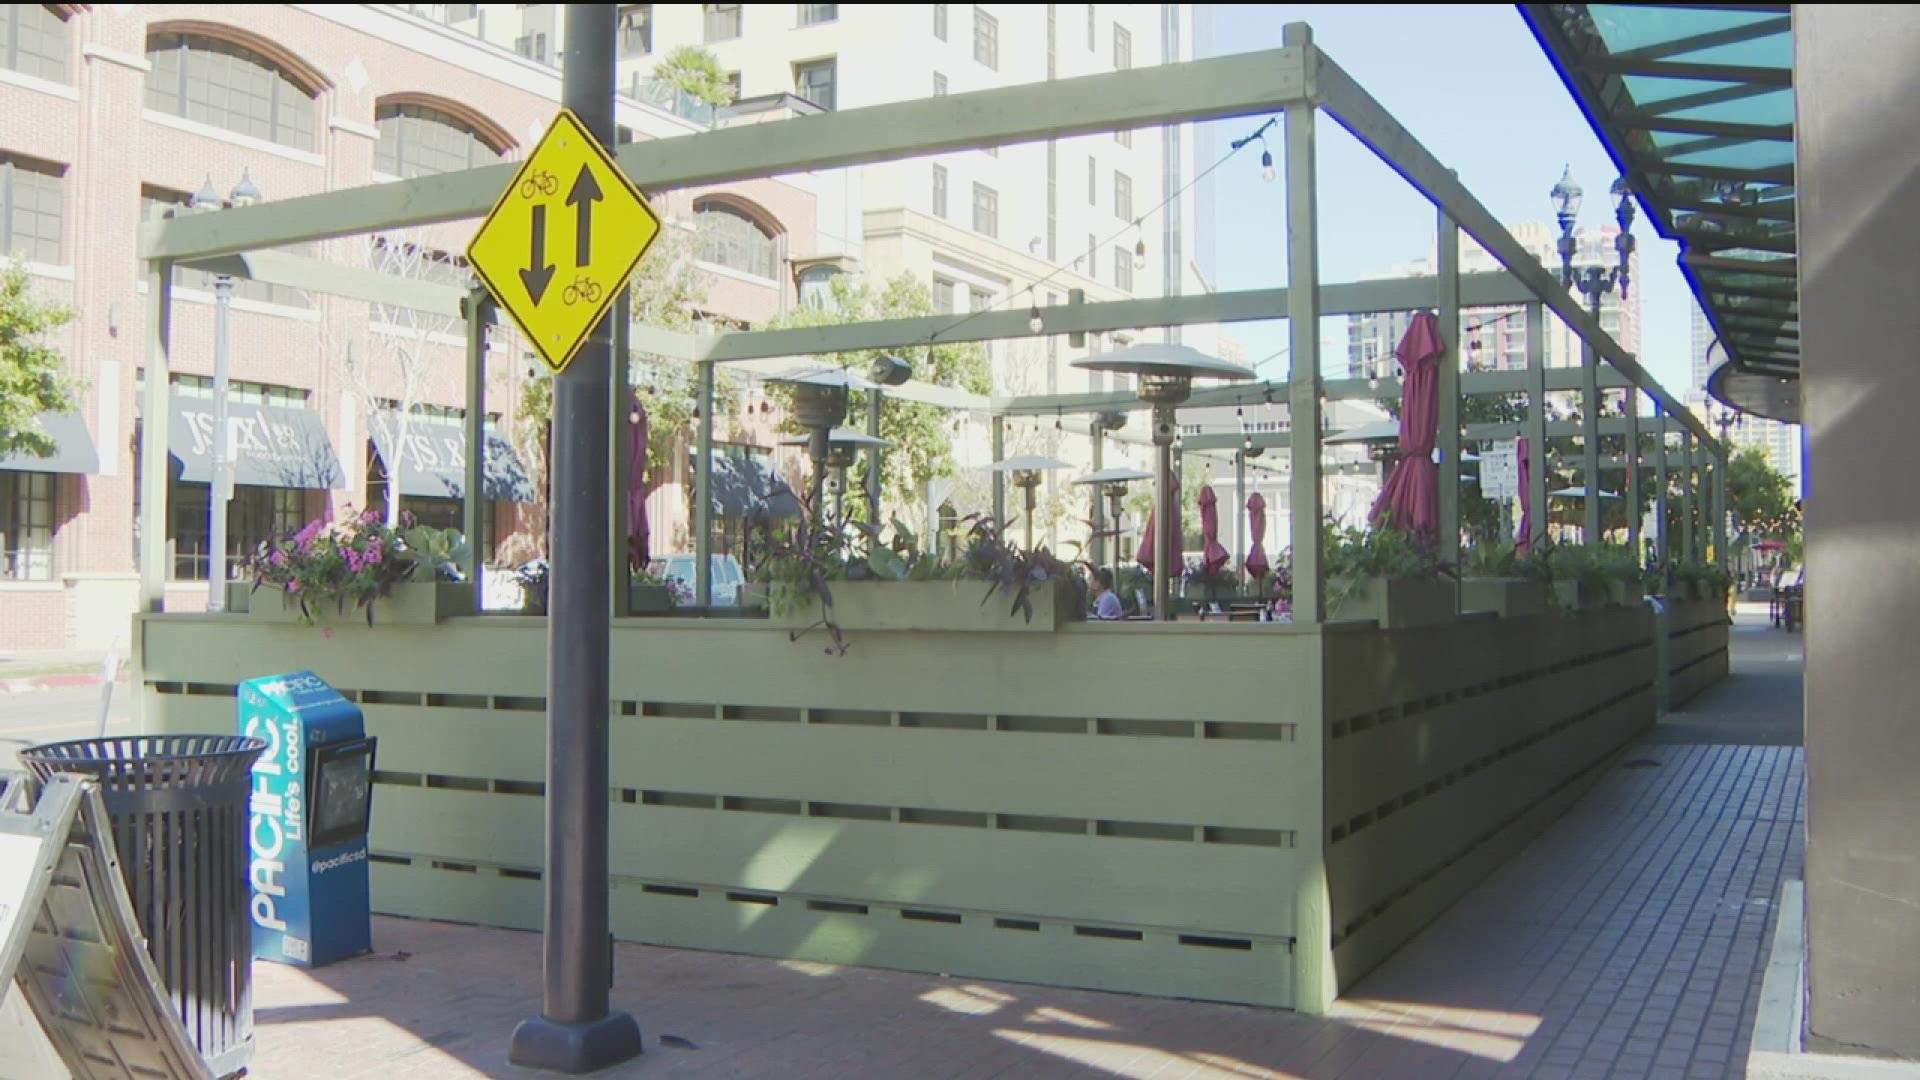 Wednesday marks a key deadline for restaurant owners in the city of San Diego when it comes to those temporary permits.